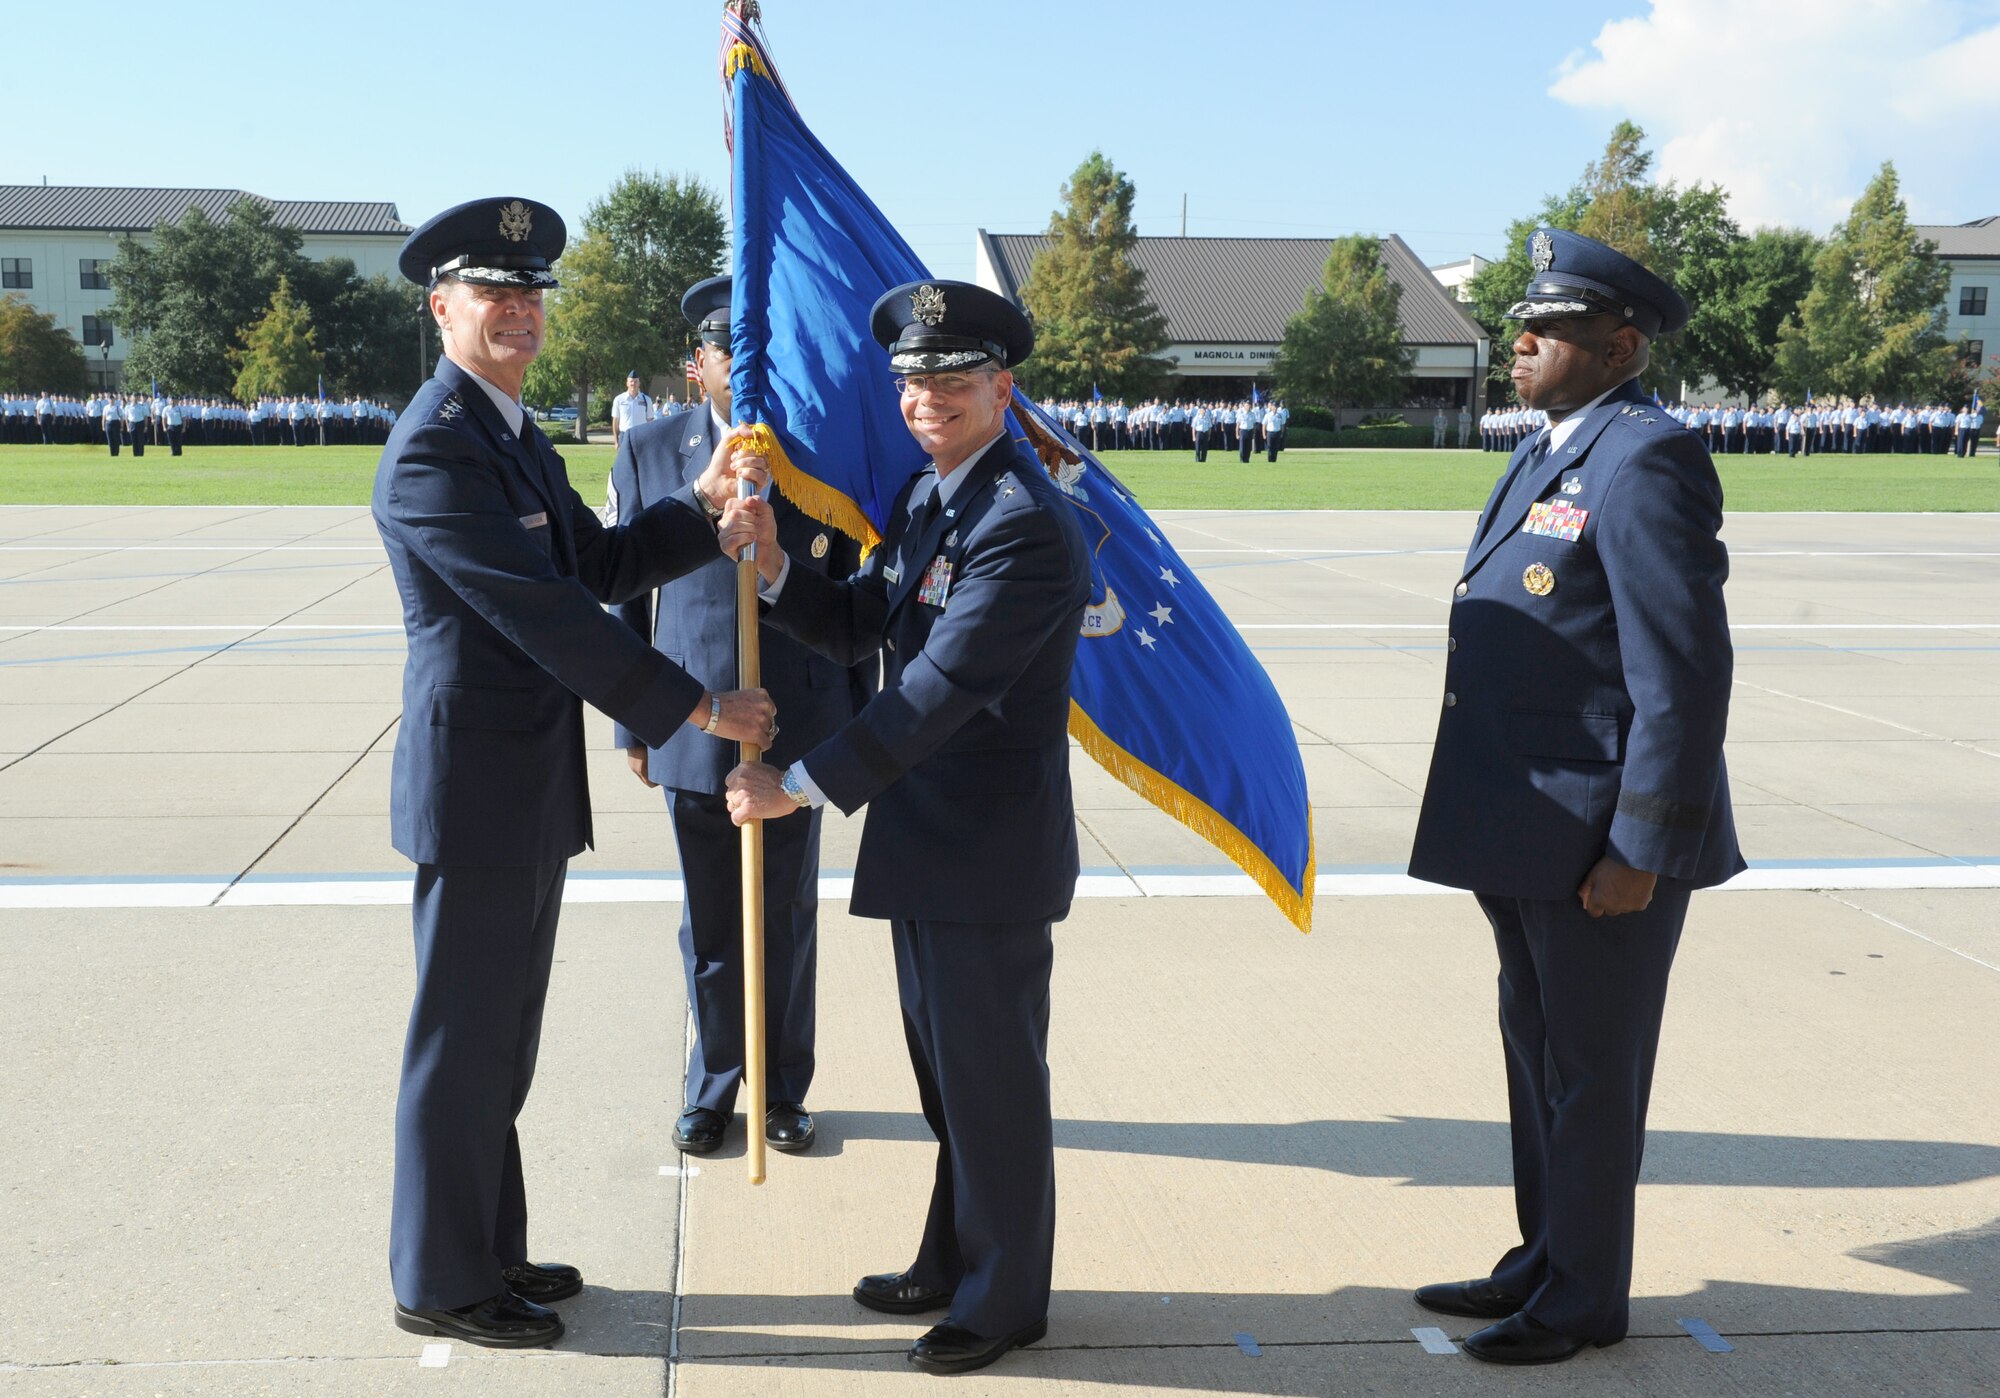 Lt. Gen. Darryl Roberson, commander, Air Education and Training Command, passes the 2nd Air Force flag to Maj. Gen. Bob LaBrutta, incoming 2nd AF commander, during the 2nd AF change of command ceremony at the Levitow Training Support Facility Aug. 26, 2016, on Keesler Air Force Base, Miss. LaBrutta was previously the 502nd Air Base Wing and Joint Base San Antonio, Texas, commander and assumed command from  Maj. Gen. Mark Brown, who is heading to Joint Base San Antonio-Randolph, Texas, where he will become the AETC vice commander. (U.S. Air Force photo by Kemberly Groue)